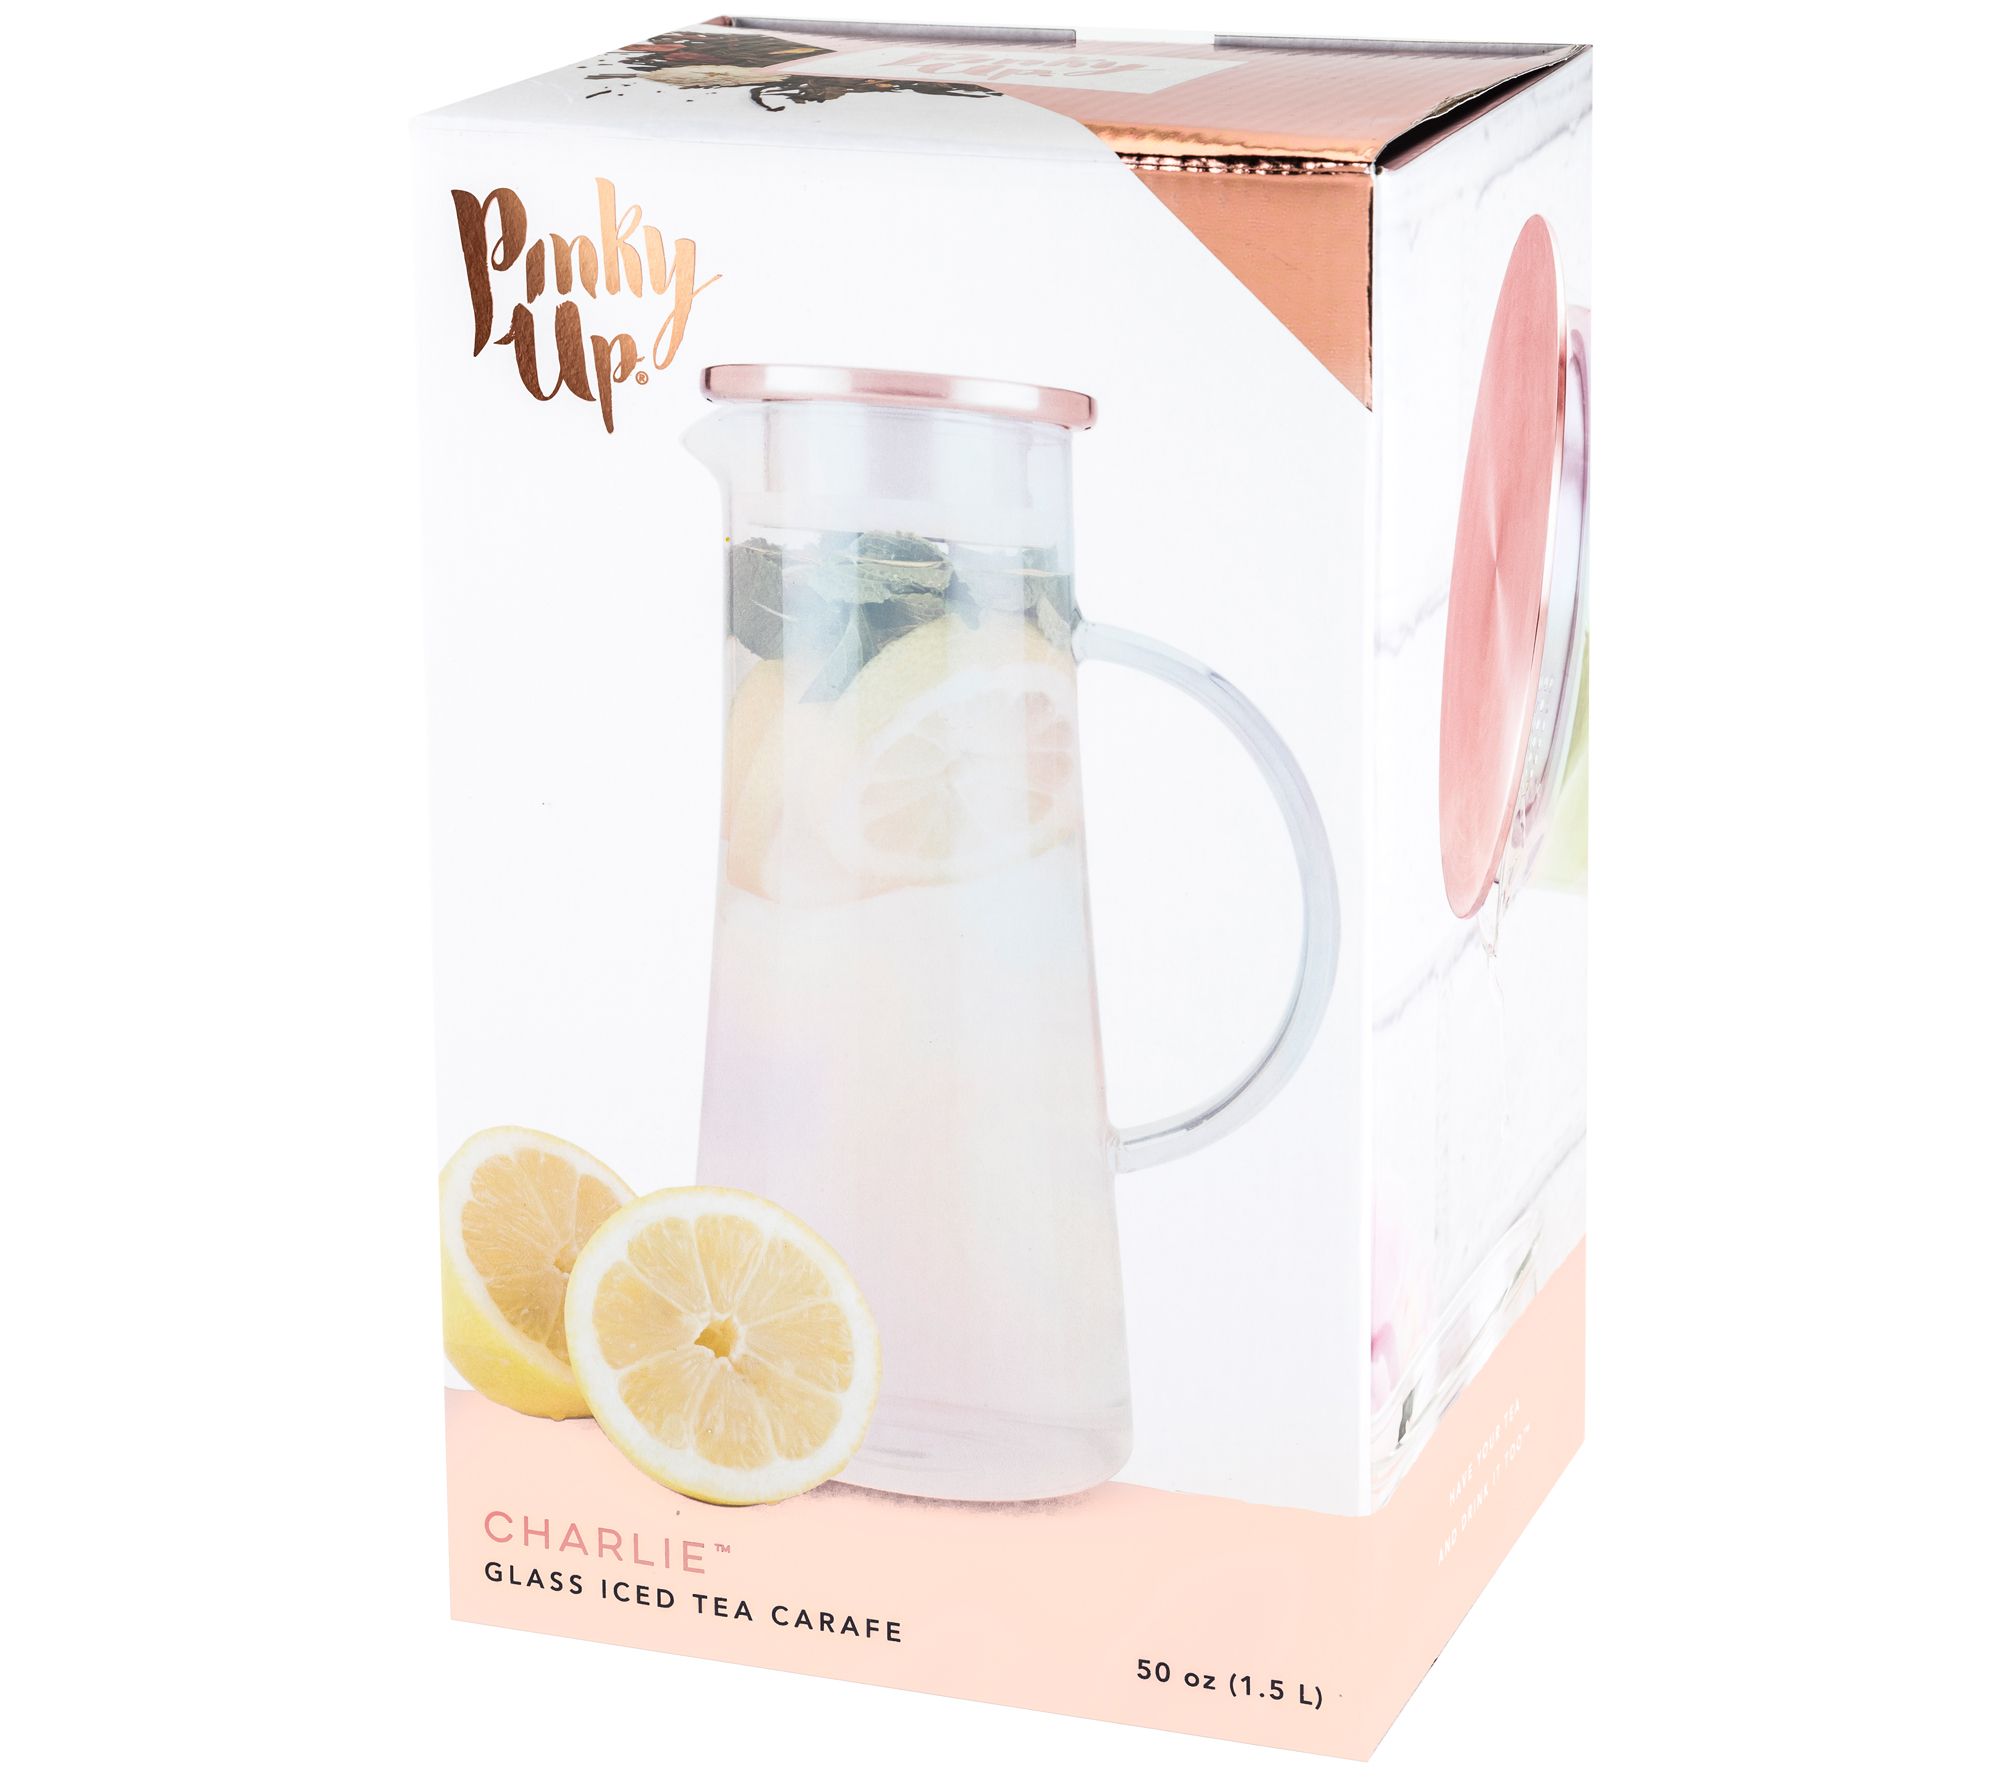 served Vacuum-Insulated Pitcher (2L) - Strawberry